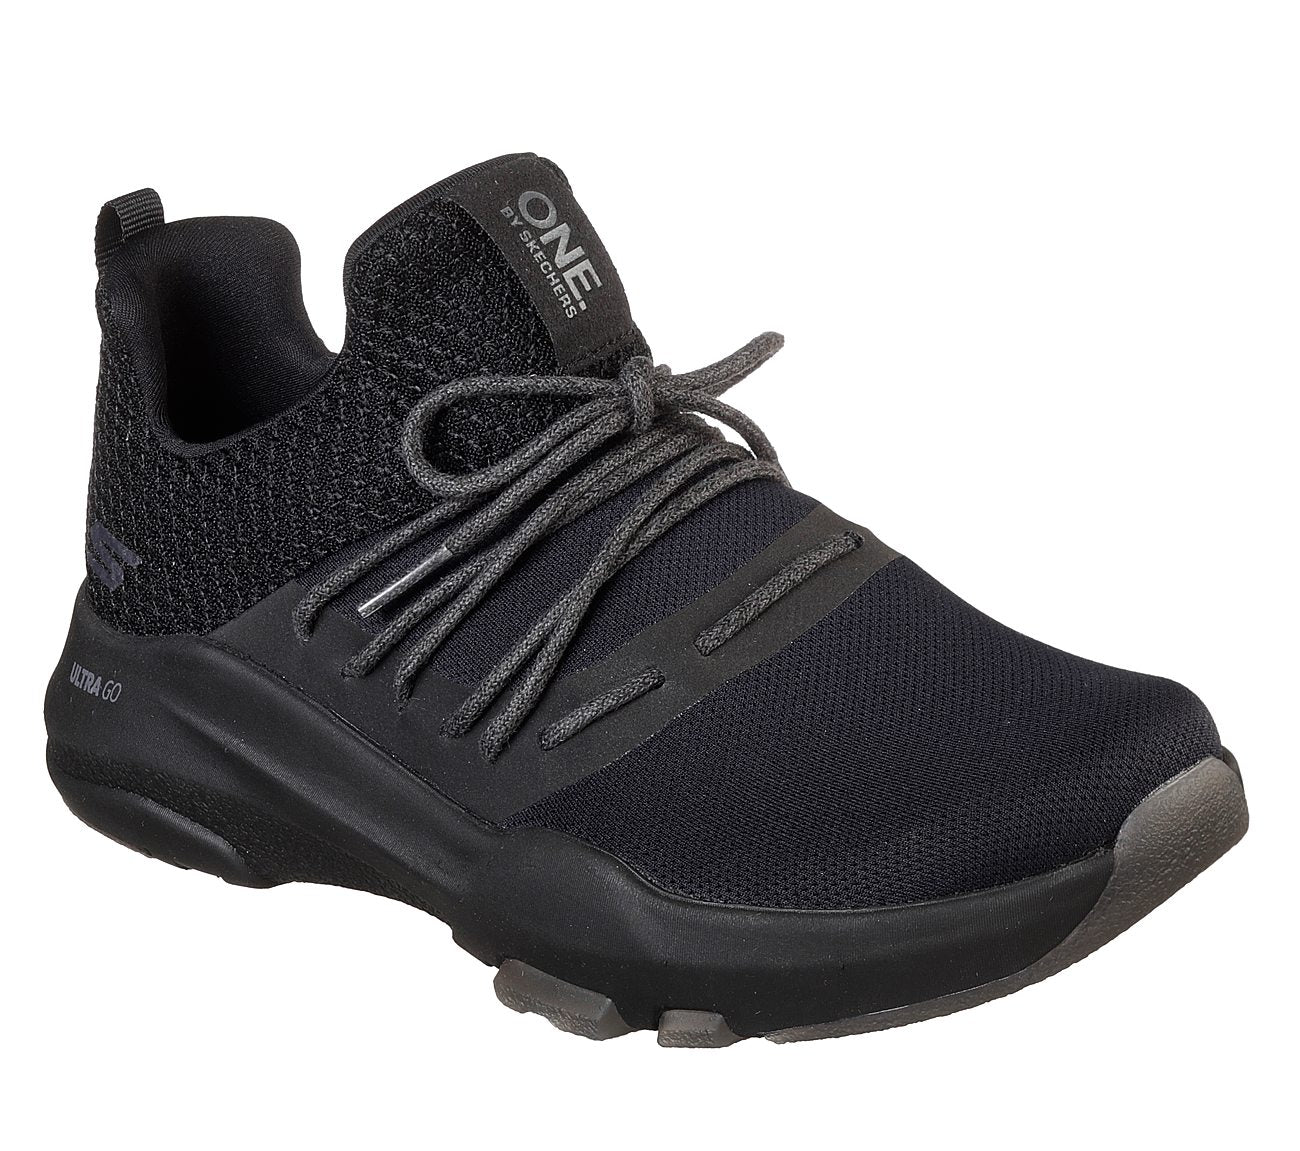 SKECHERS ONE ELEMENT ULTRA – The BCode 